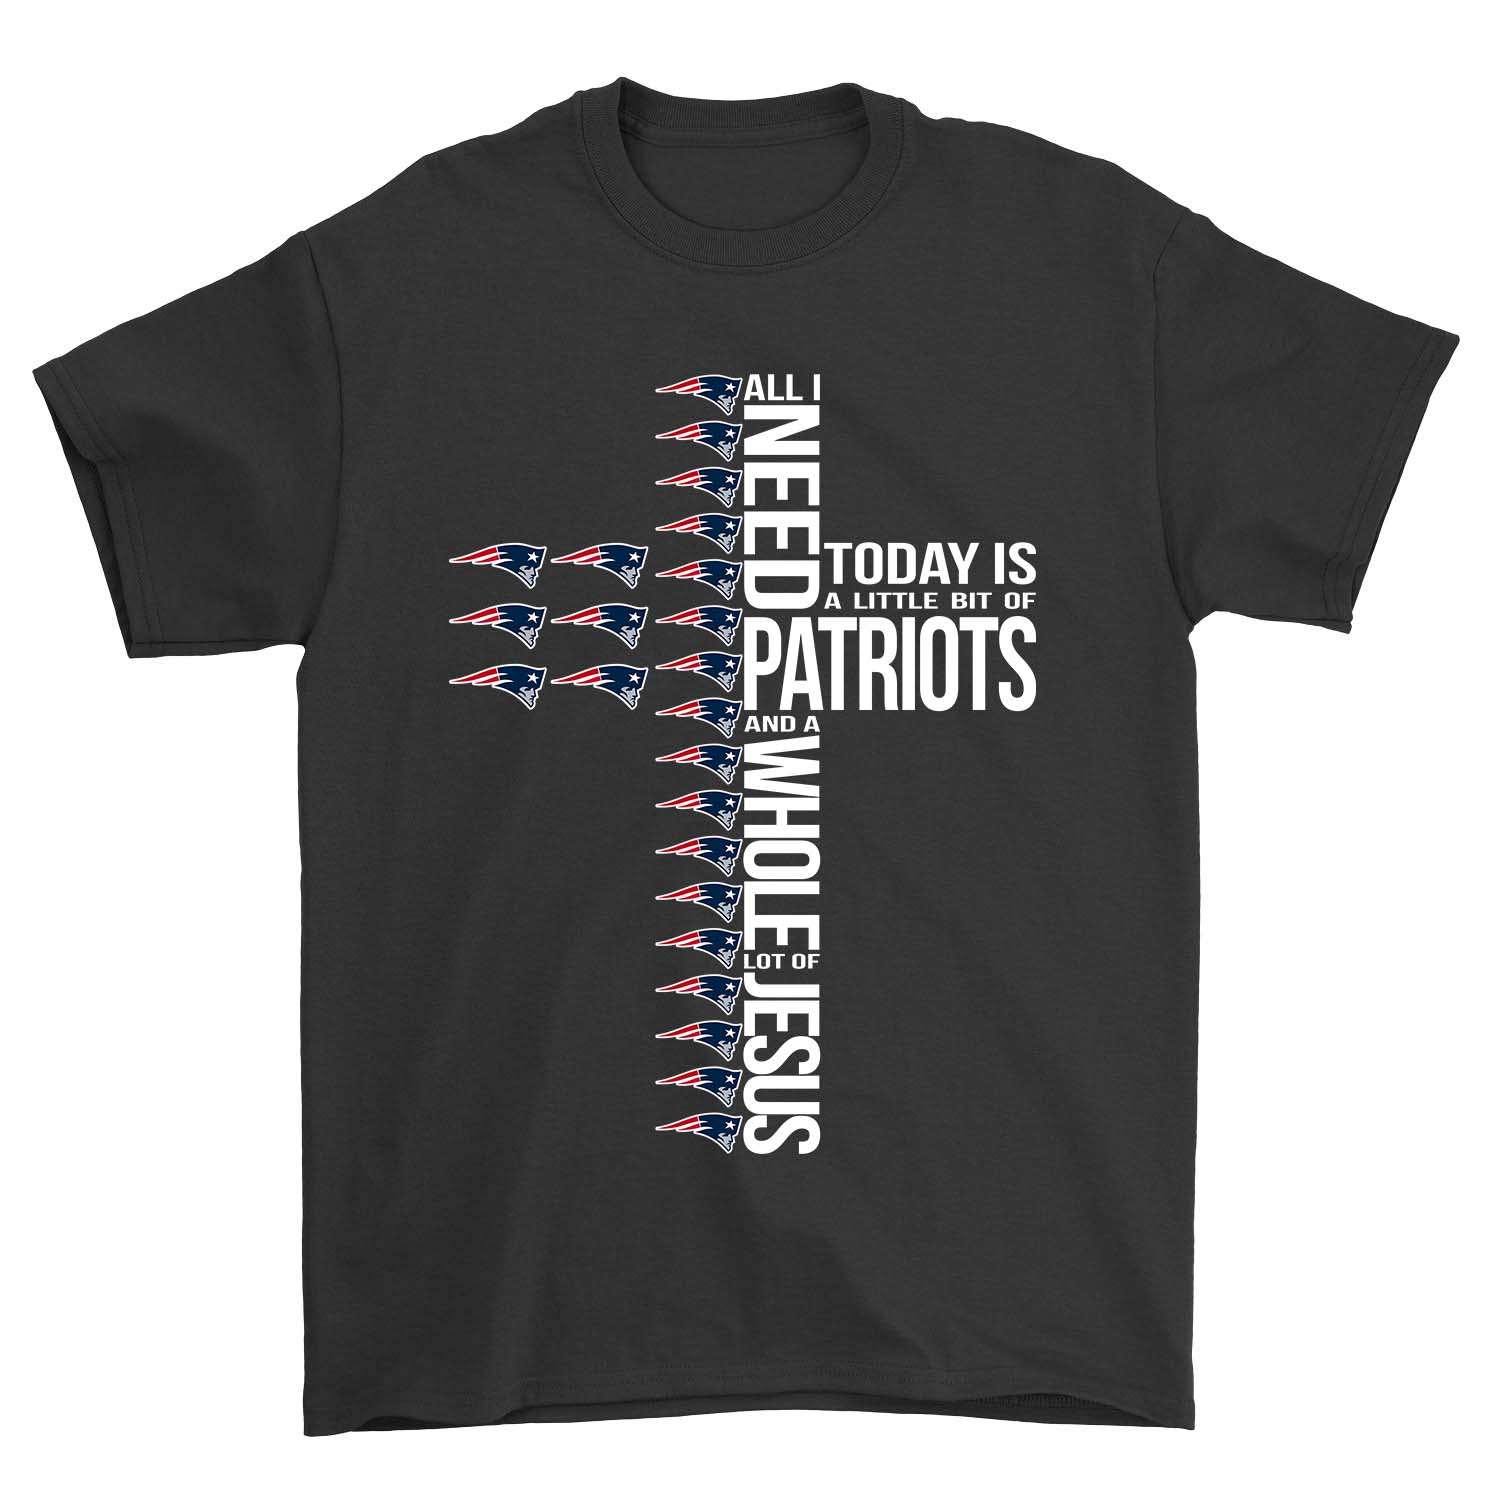 NFL New England Patriots All I Need To Day Is A Little Bit Of Patriots And A Whole Lot Of Jesus Shirt Size S-5xl